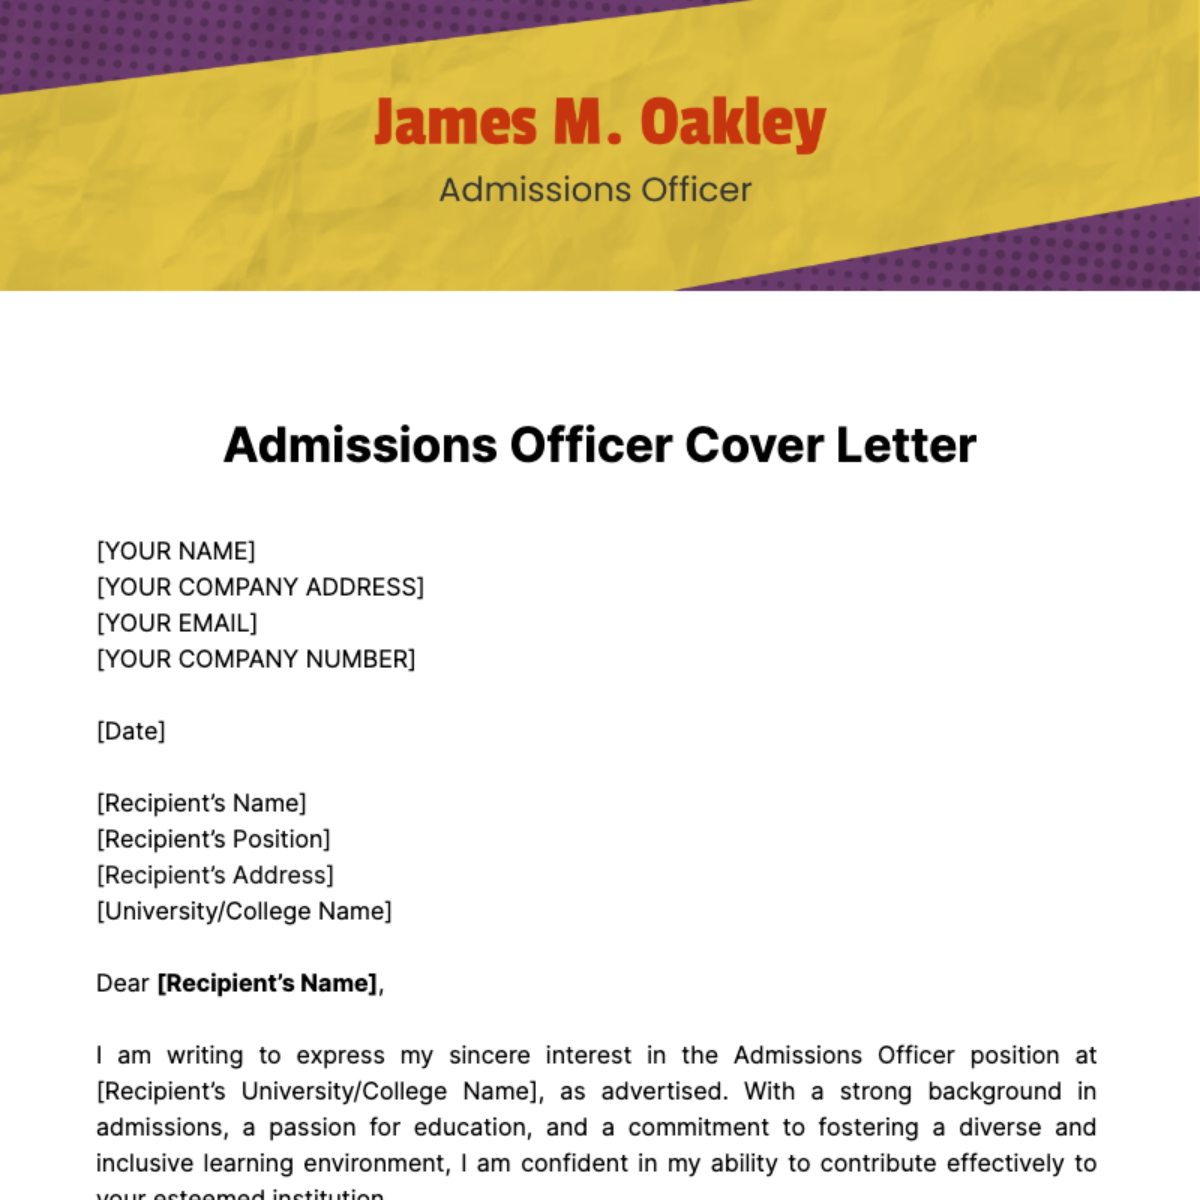 Admissions Officer Cover Letter Template